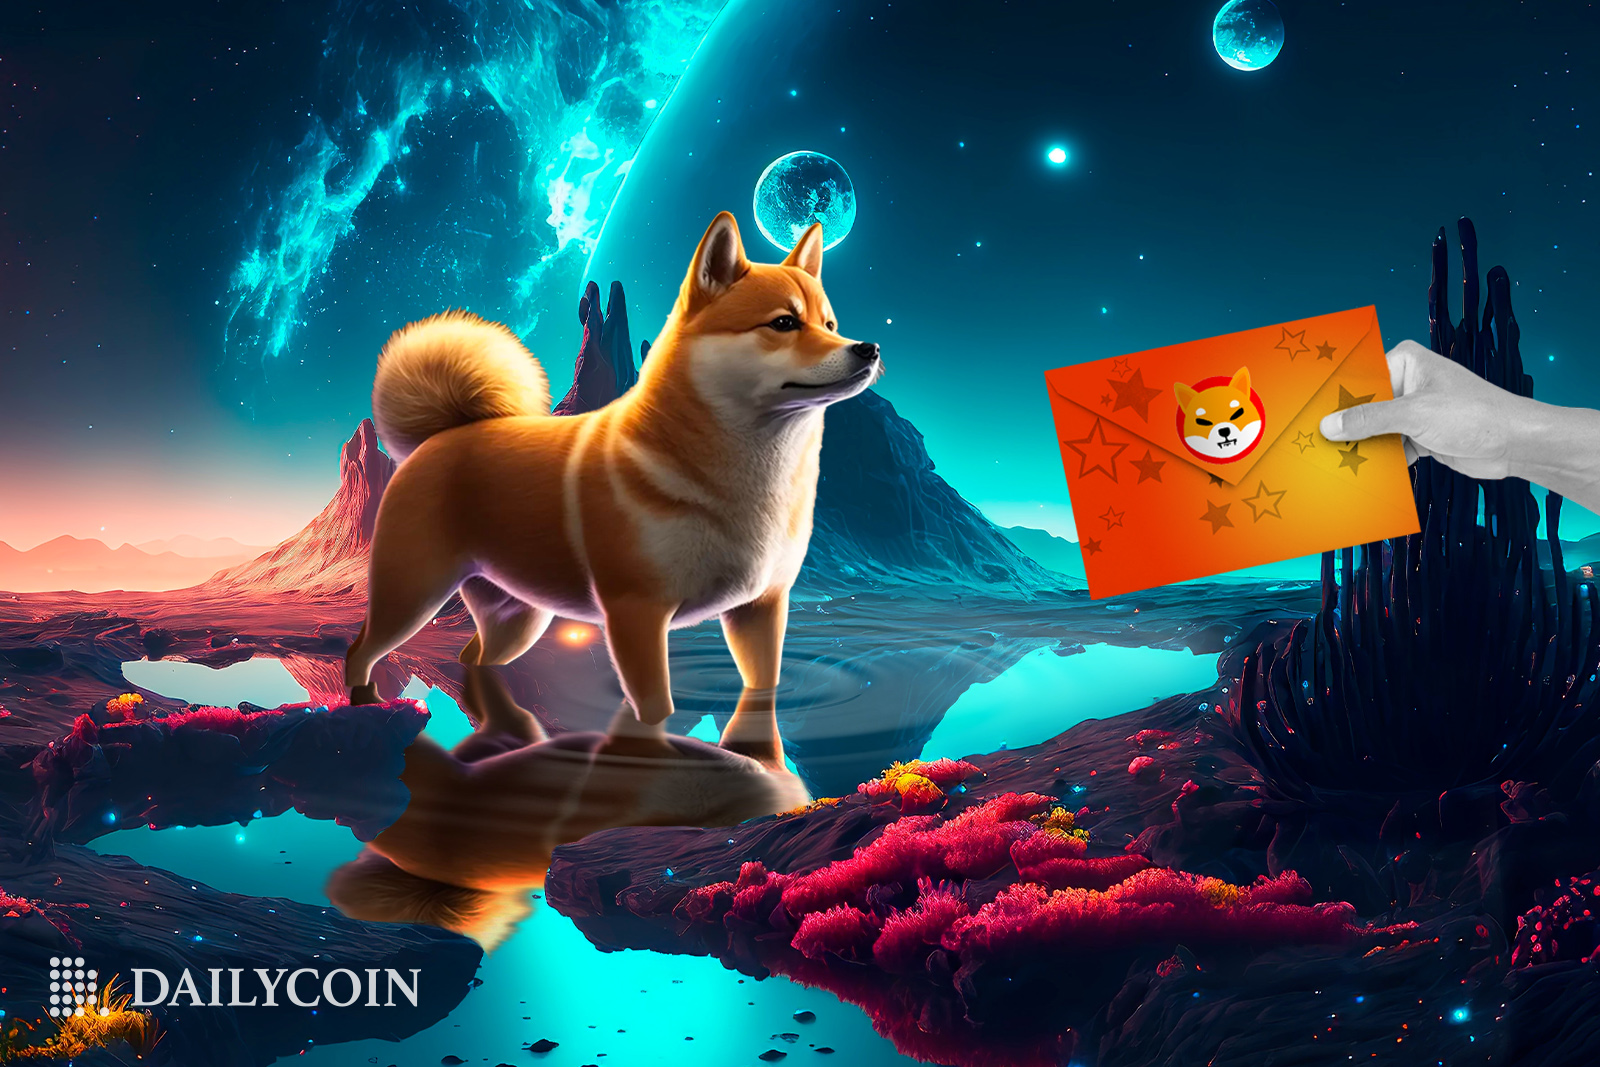 Shiba Inu dog is traveling the hills in the metaverse to be handed an orange invitation to Shibarium Beta.